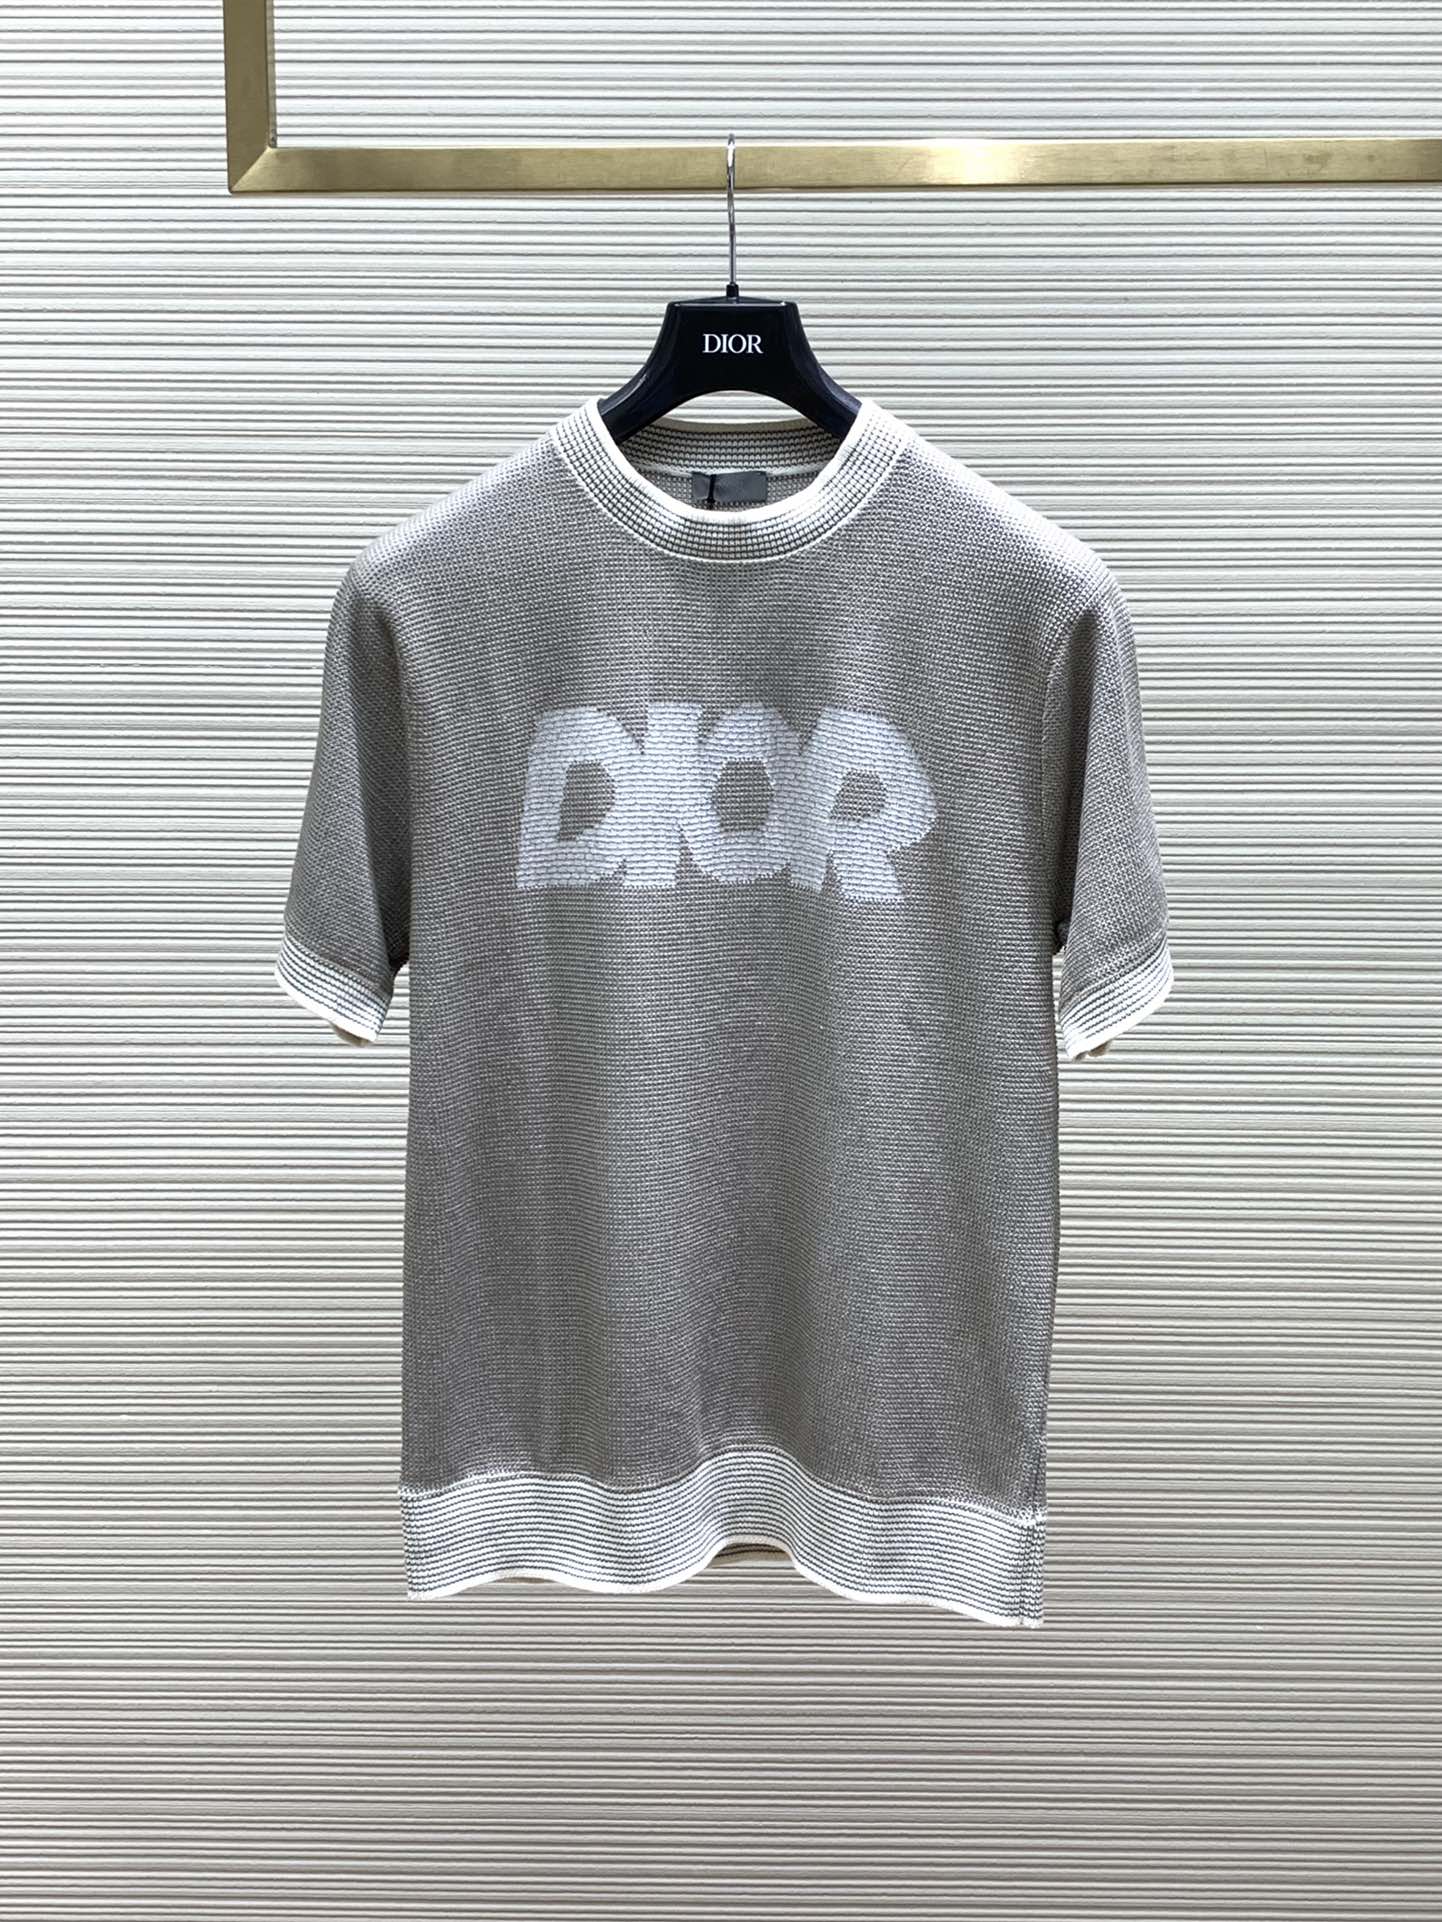 Dior Sale
 Clothing T-Shirt Embroidery Knitting Summer Collection Fashion Short Sleeve